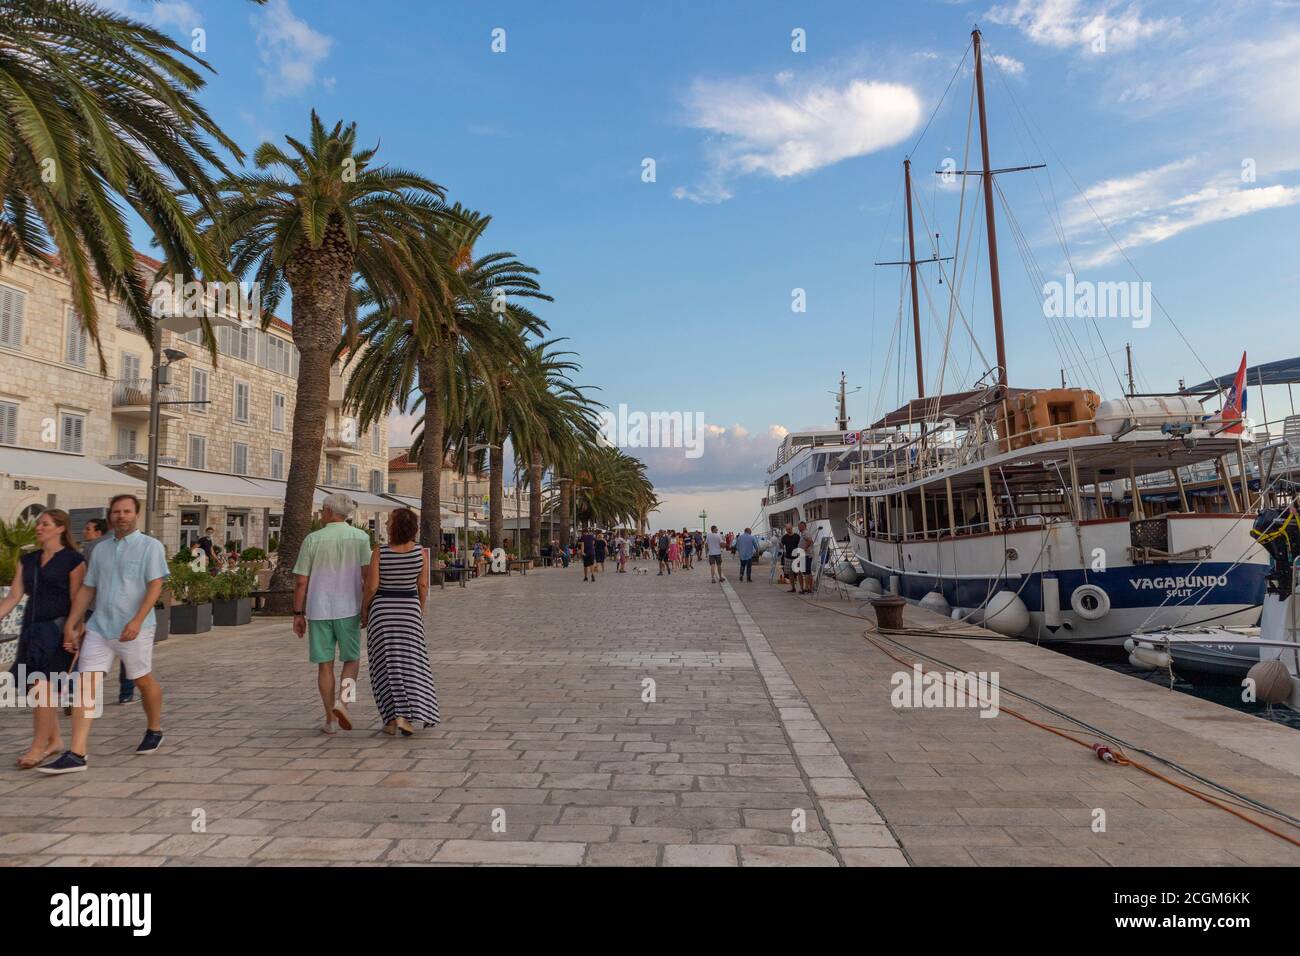 Hvar/ Croatia-August 9th, 2020: Hvar town waterfront with people walking and observing luxurios zachts and sailboats as well as traditional, dalmatian Stock Photo